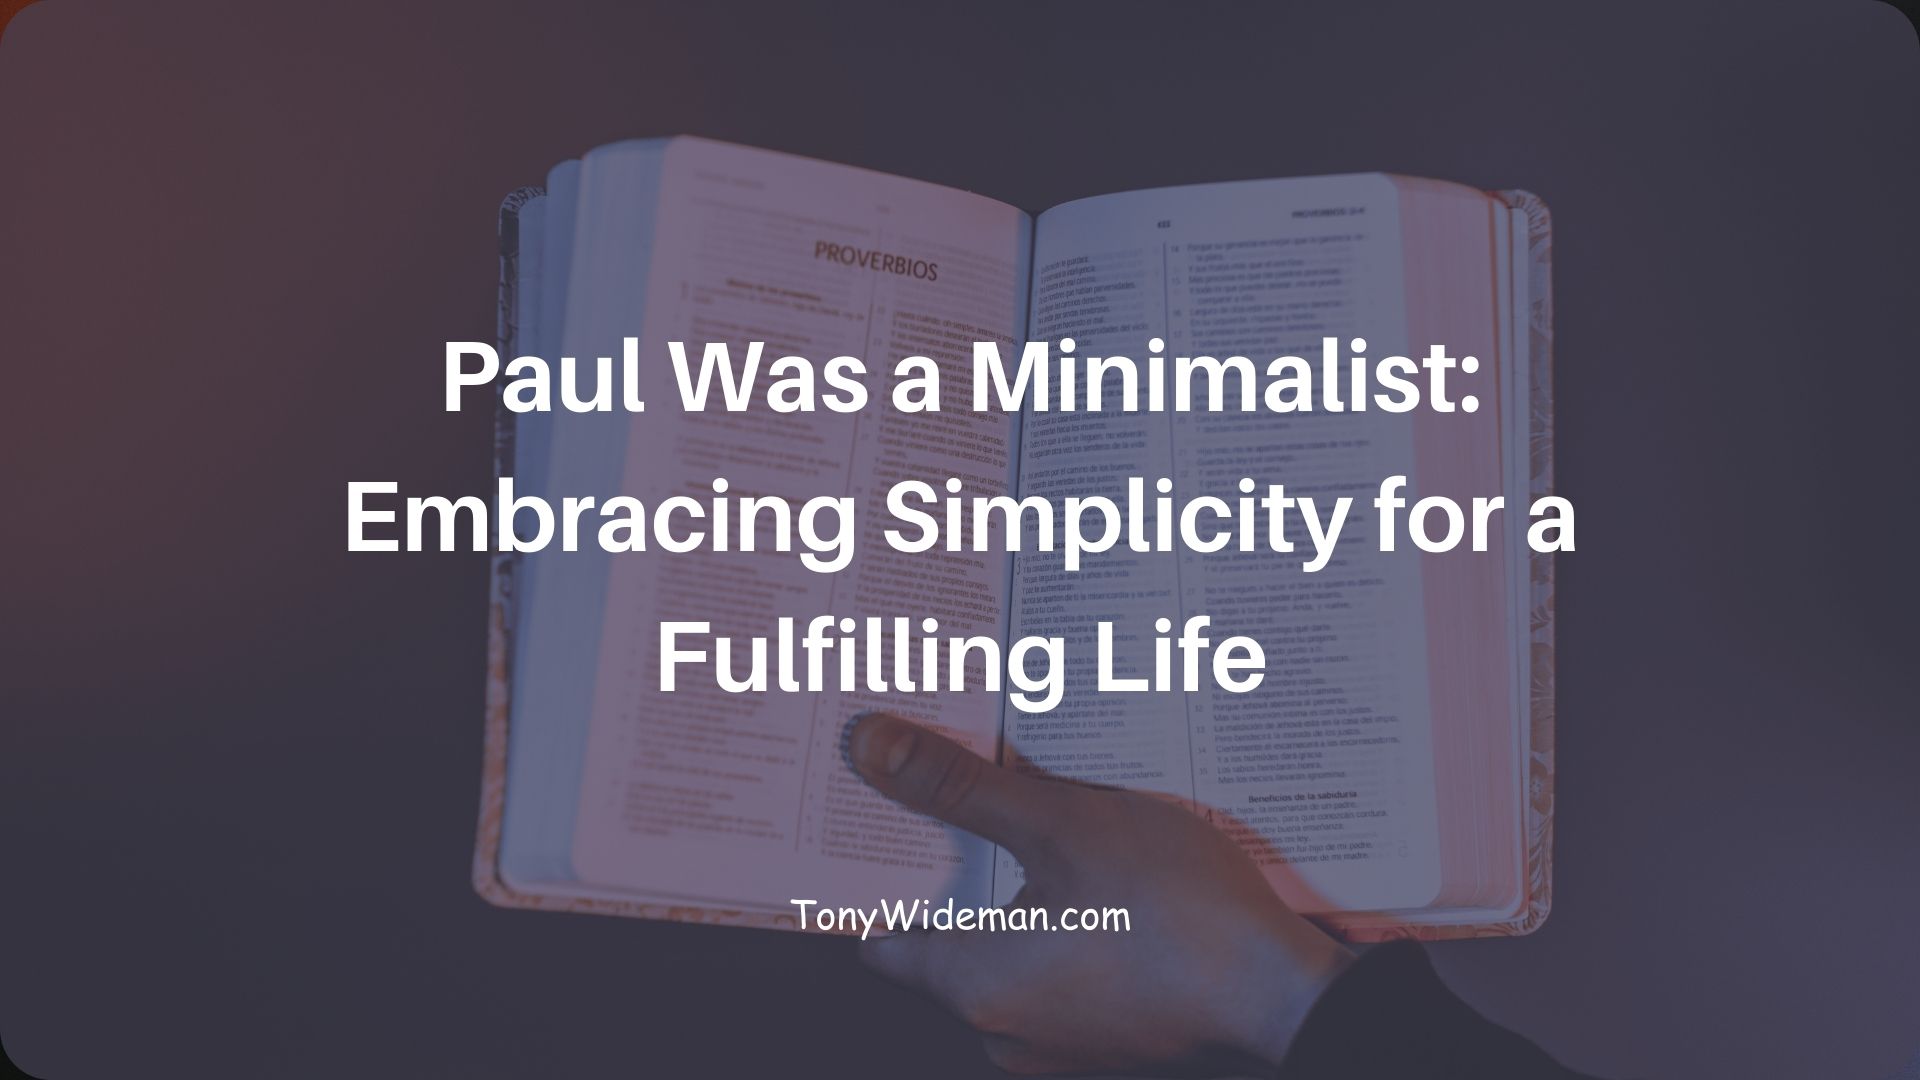 Paul Was a Minimalist: Embracing Simplicity for a Fulfilling Life